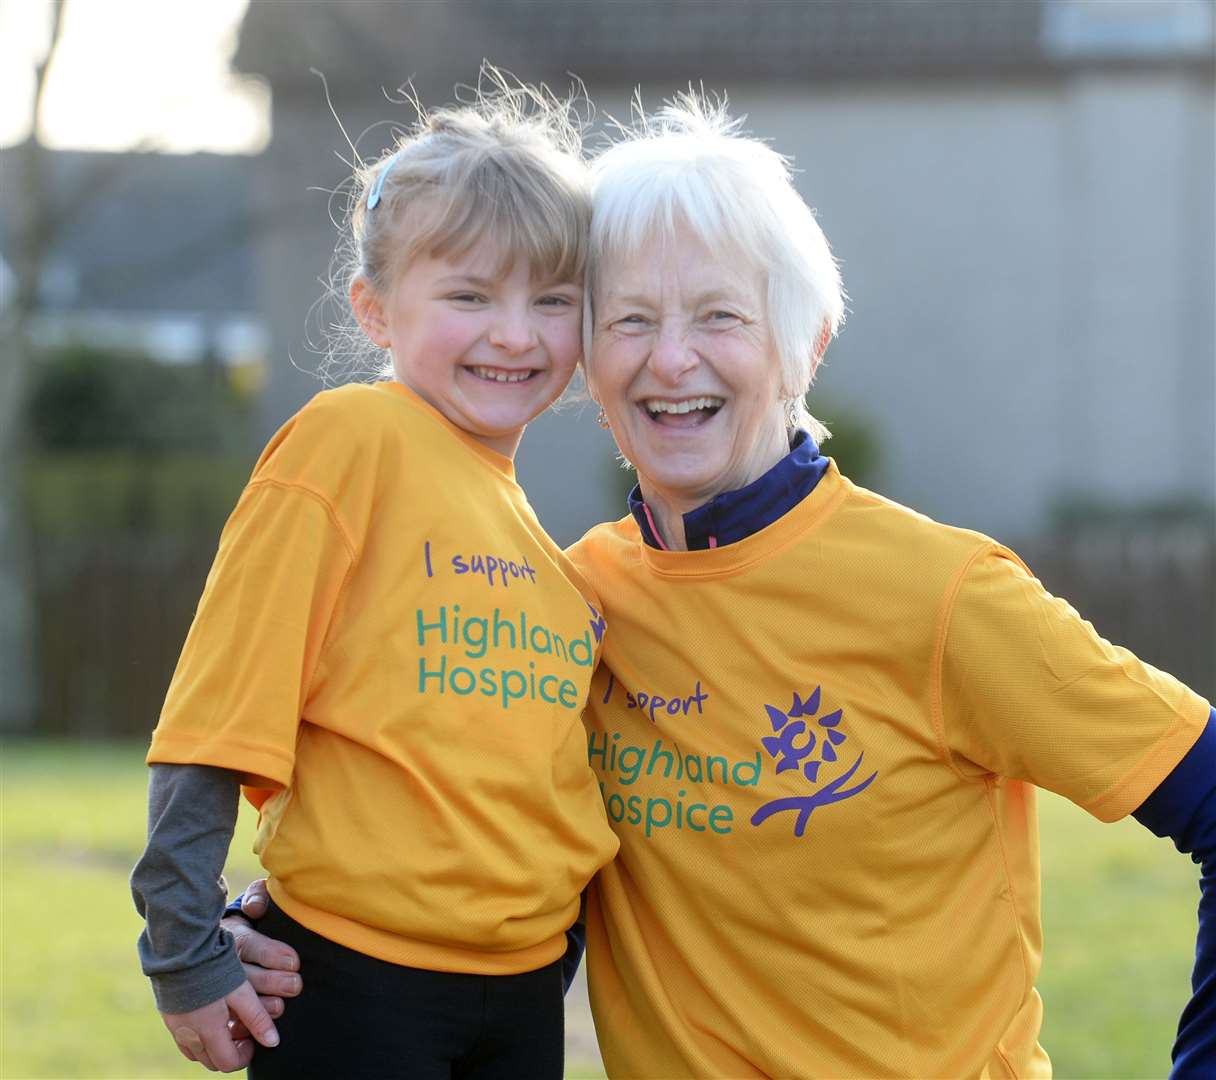 Lily Gray and gran Liz run for Highland Hospice.